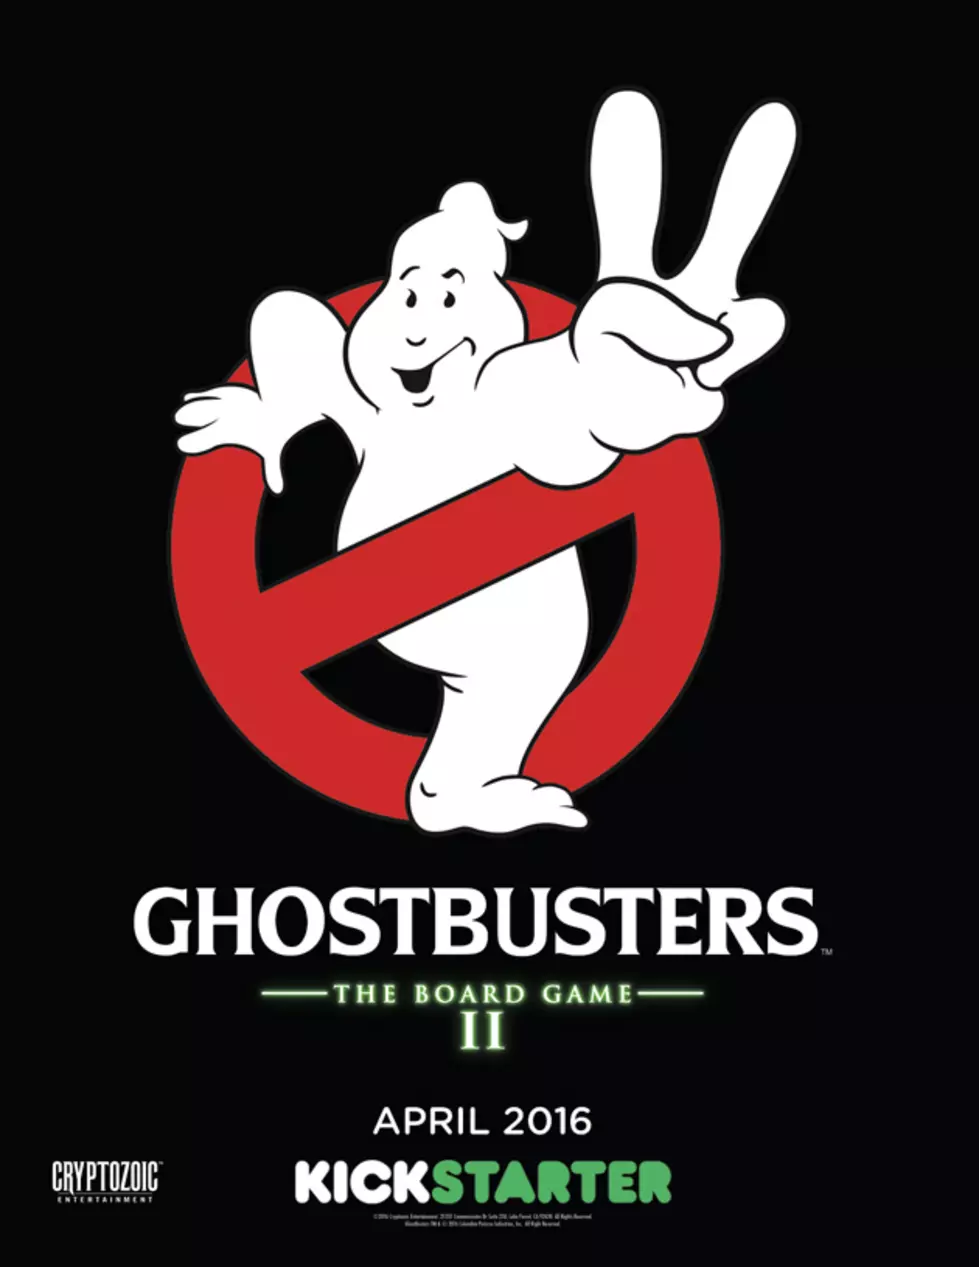 &#8216;Ghostbusters&#8217; Board Game Getting Kickstarter-Funded Sequel